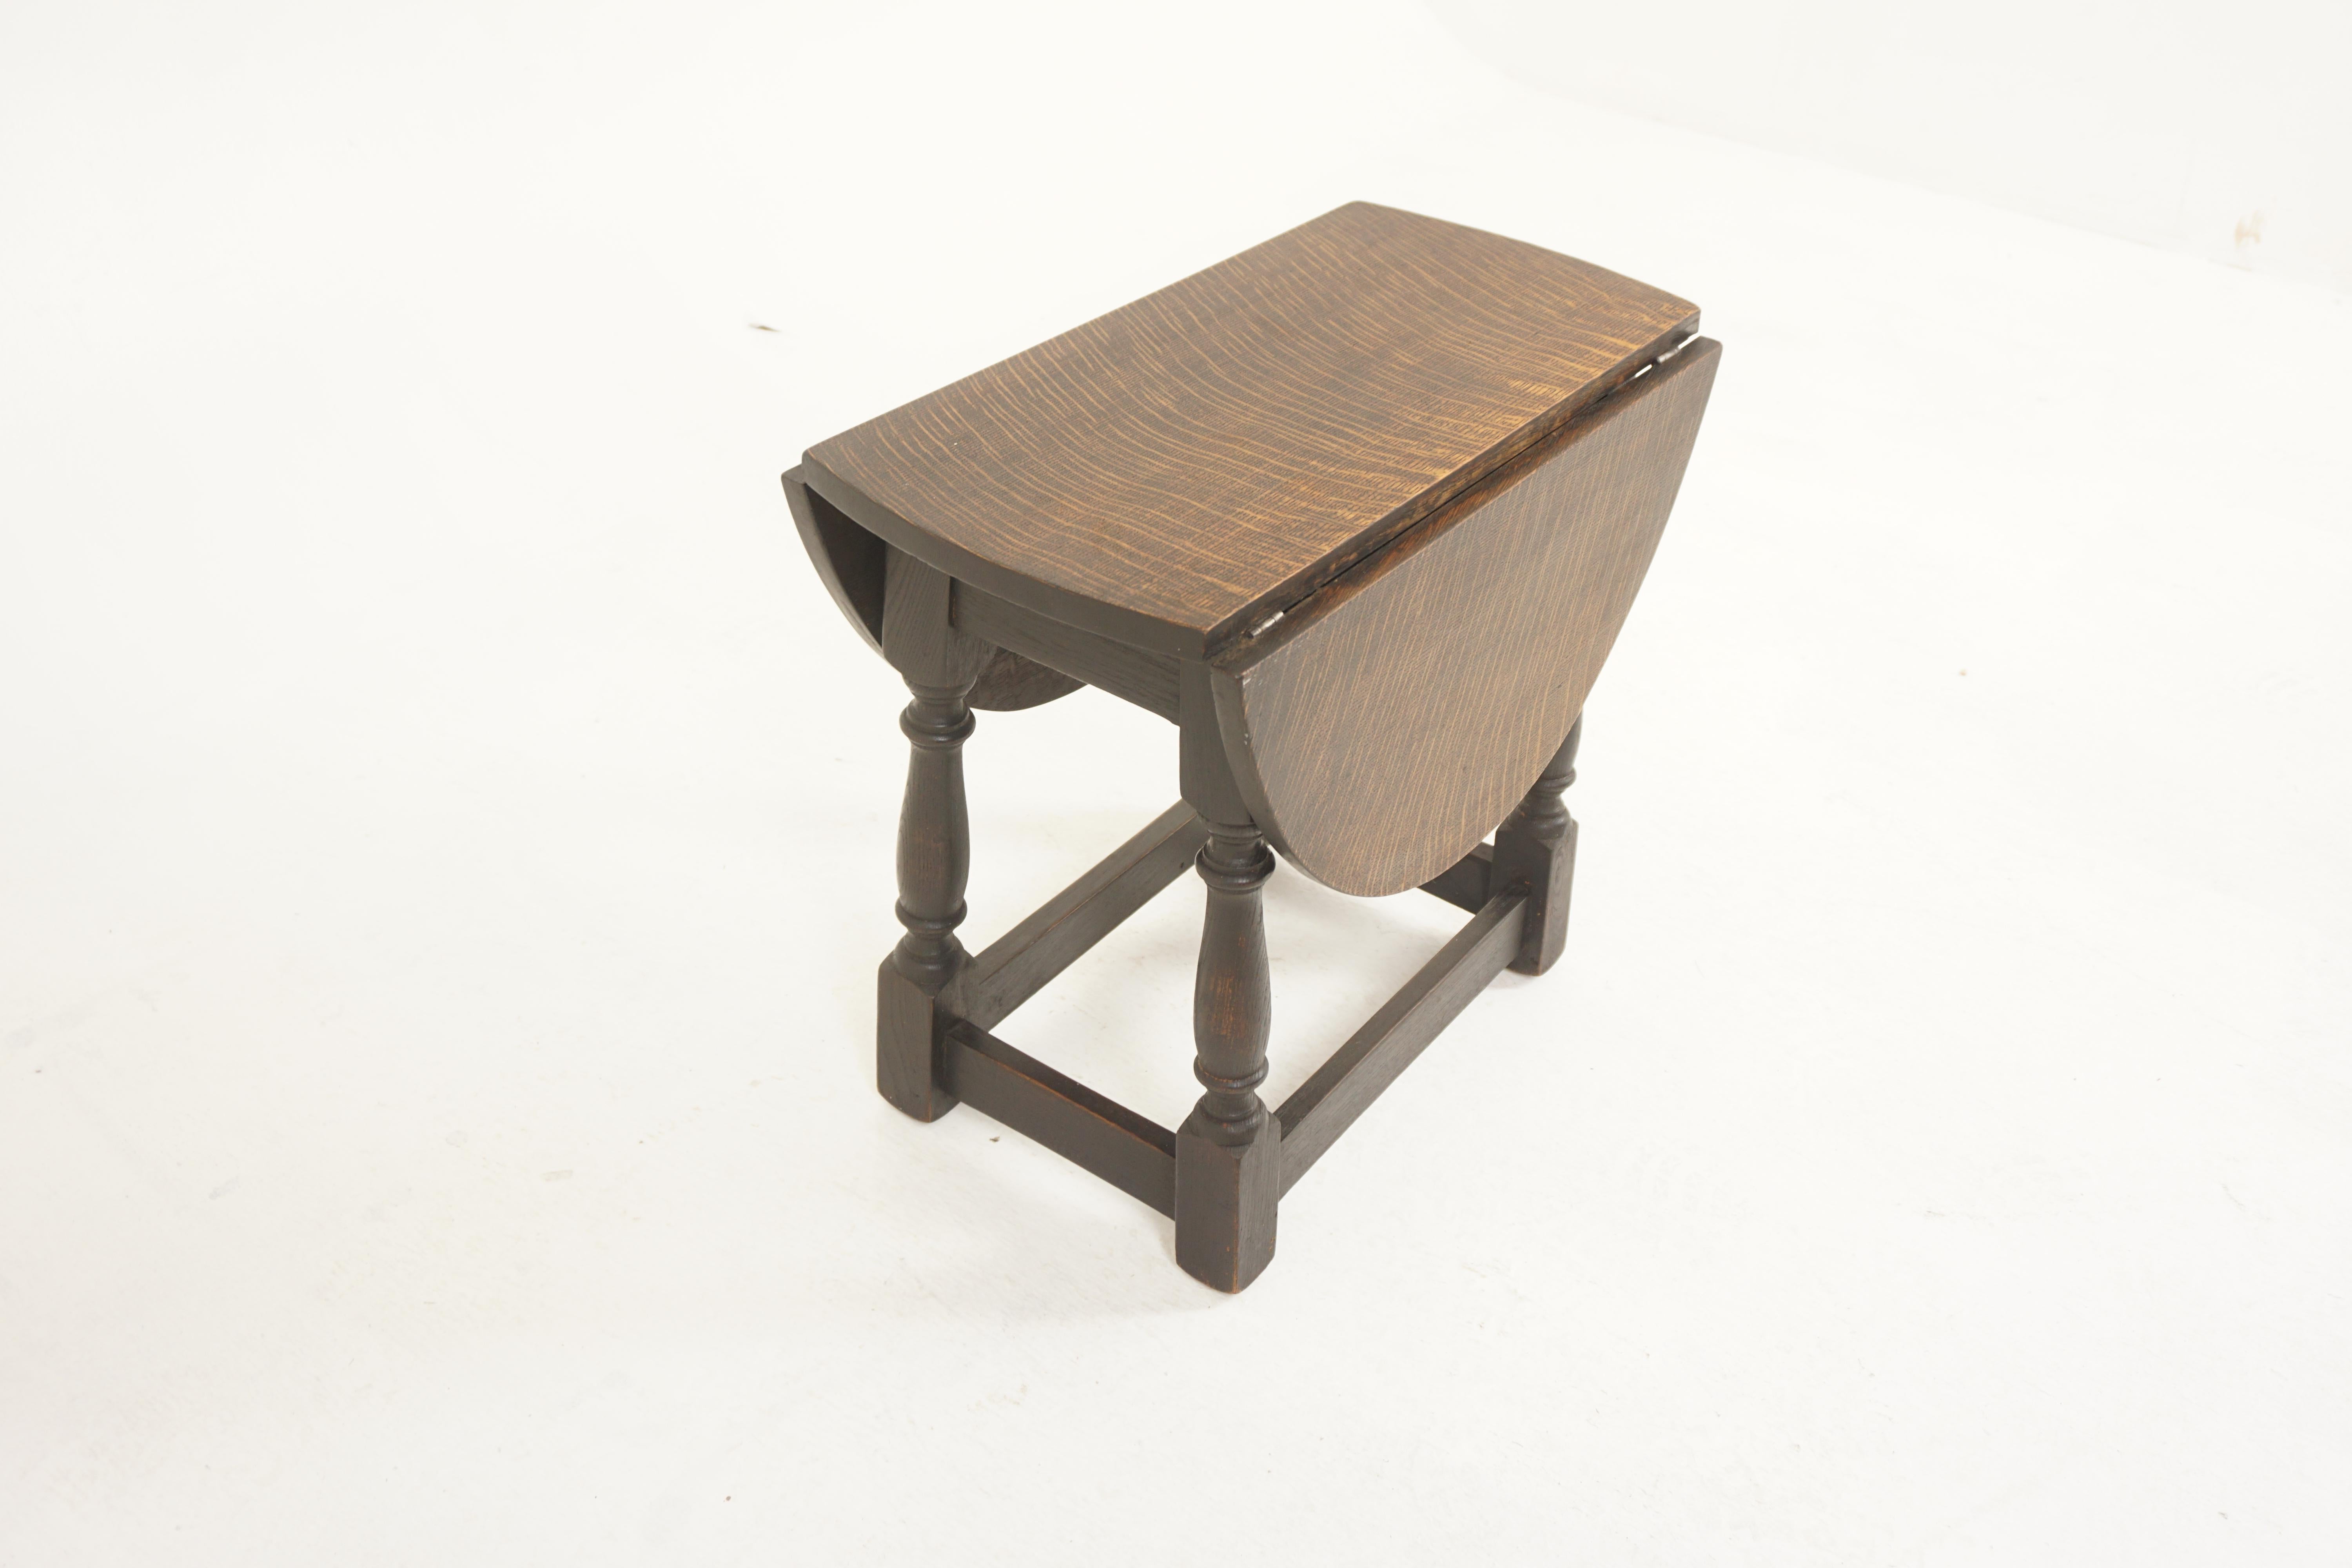 Hand-Crafted Vintage Oak Drop Leaf Table With Rotating Top, Scotland 1920, H1184